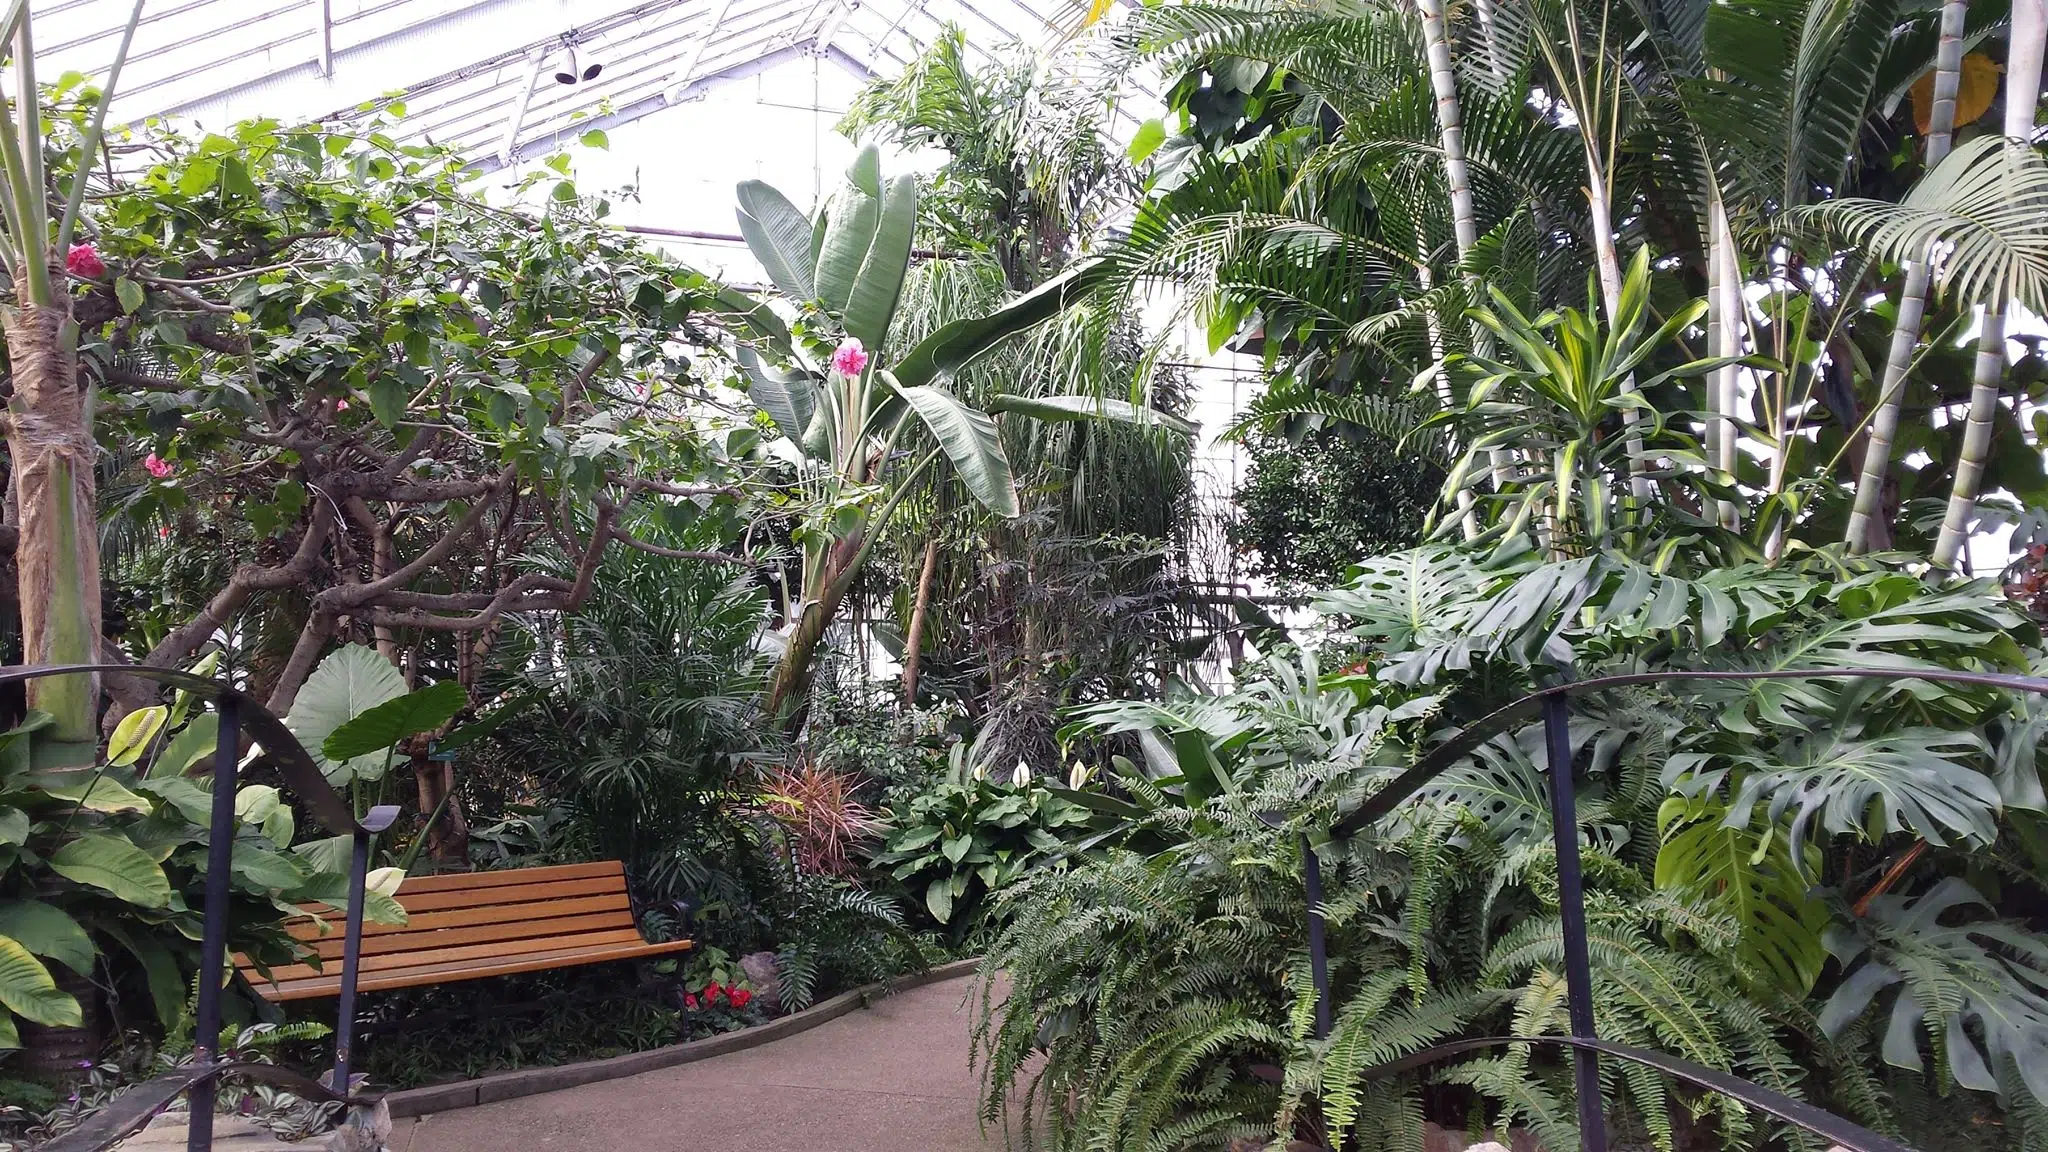 Friends of Conservatory “Ecstatic” Over Council Funding